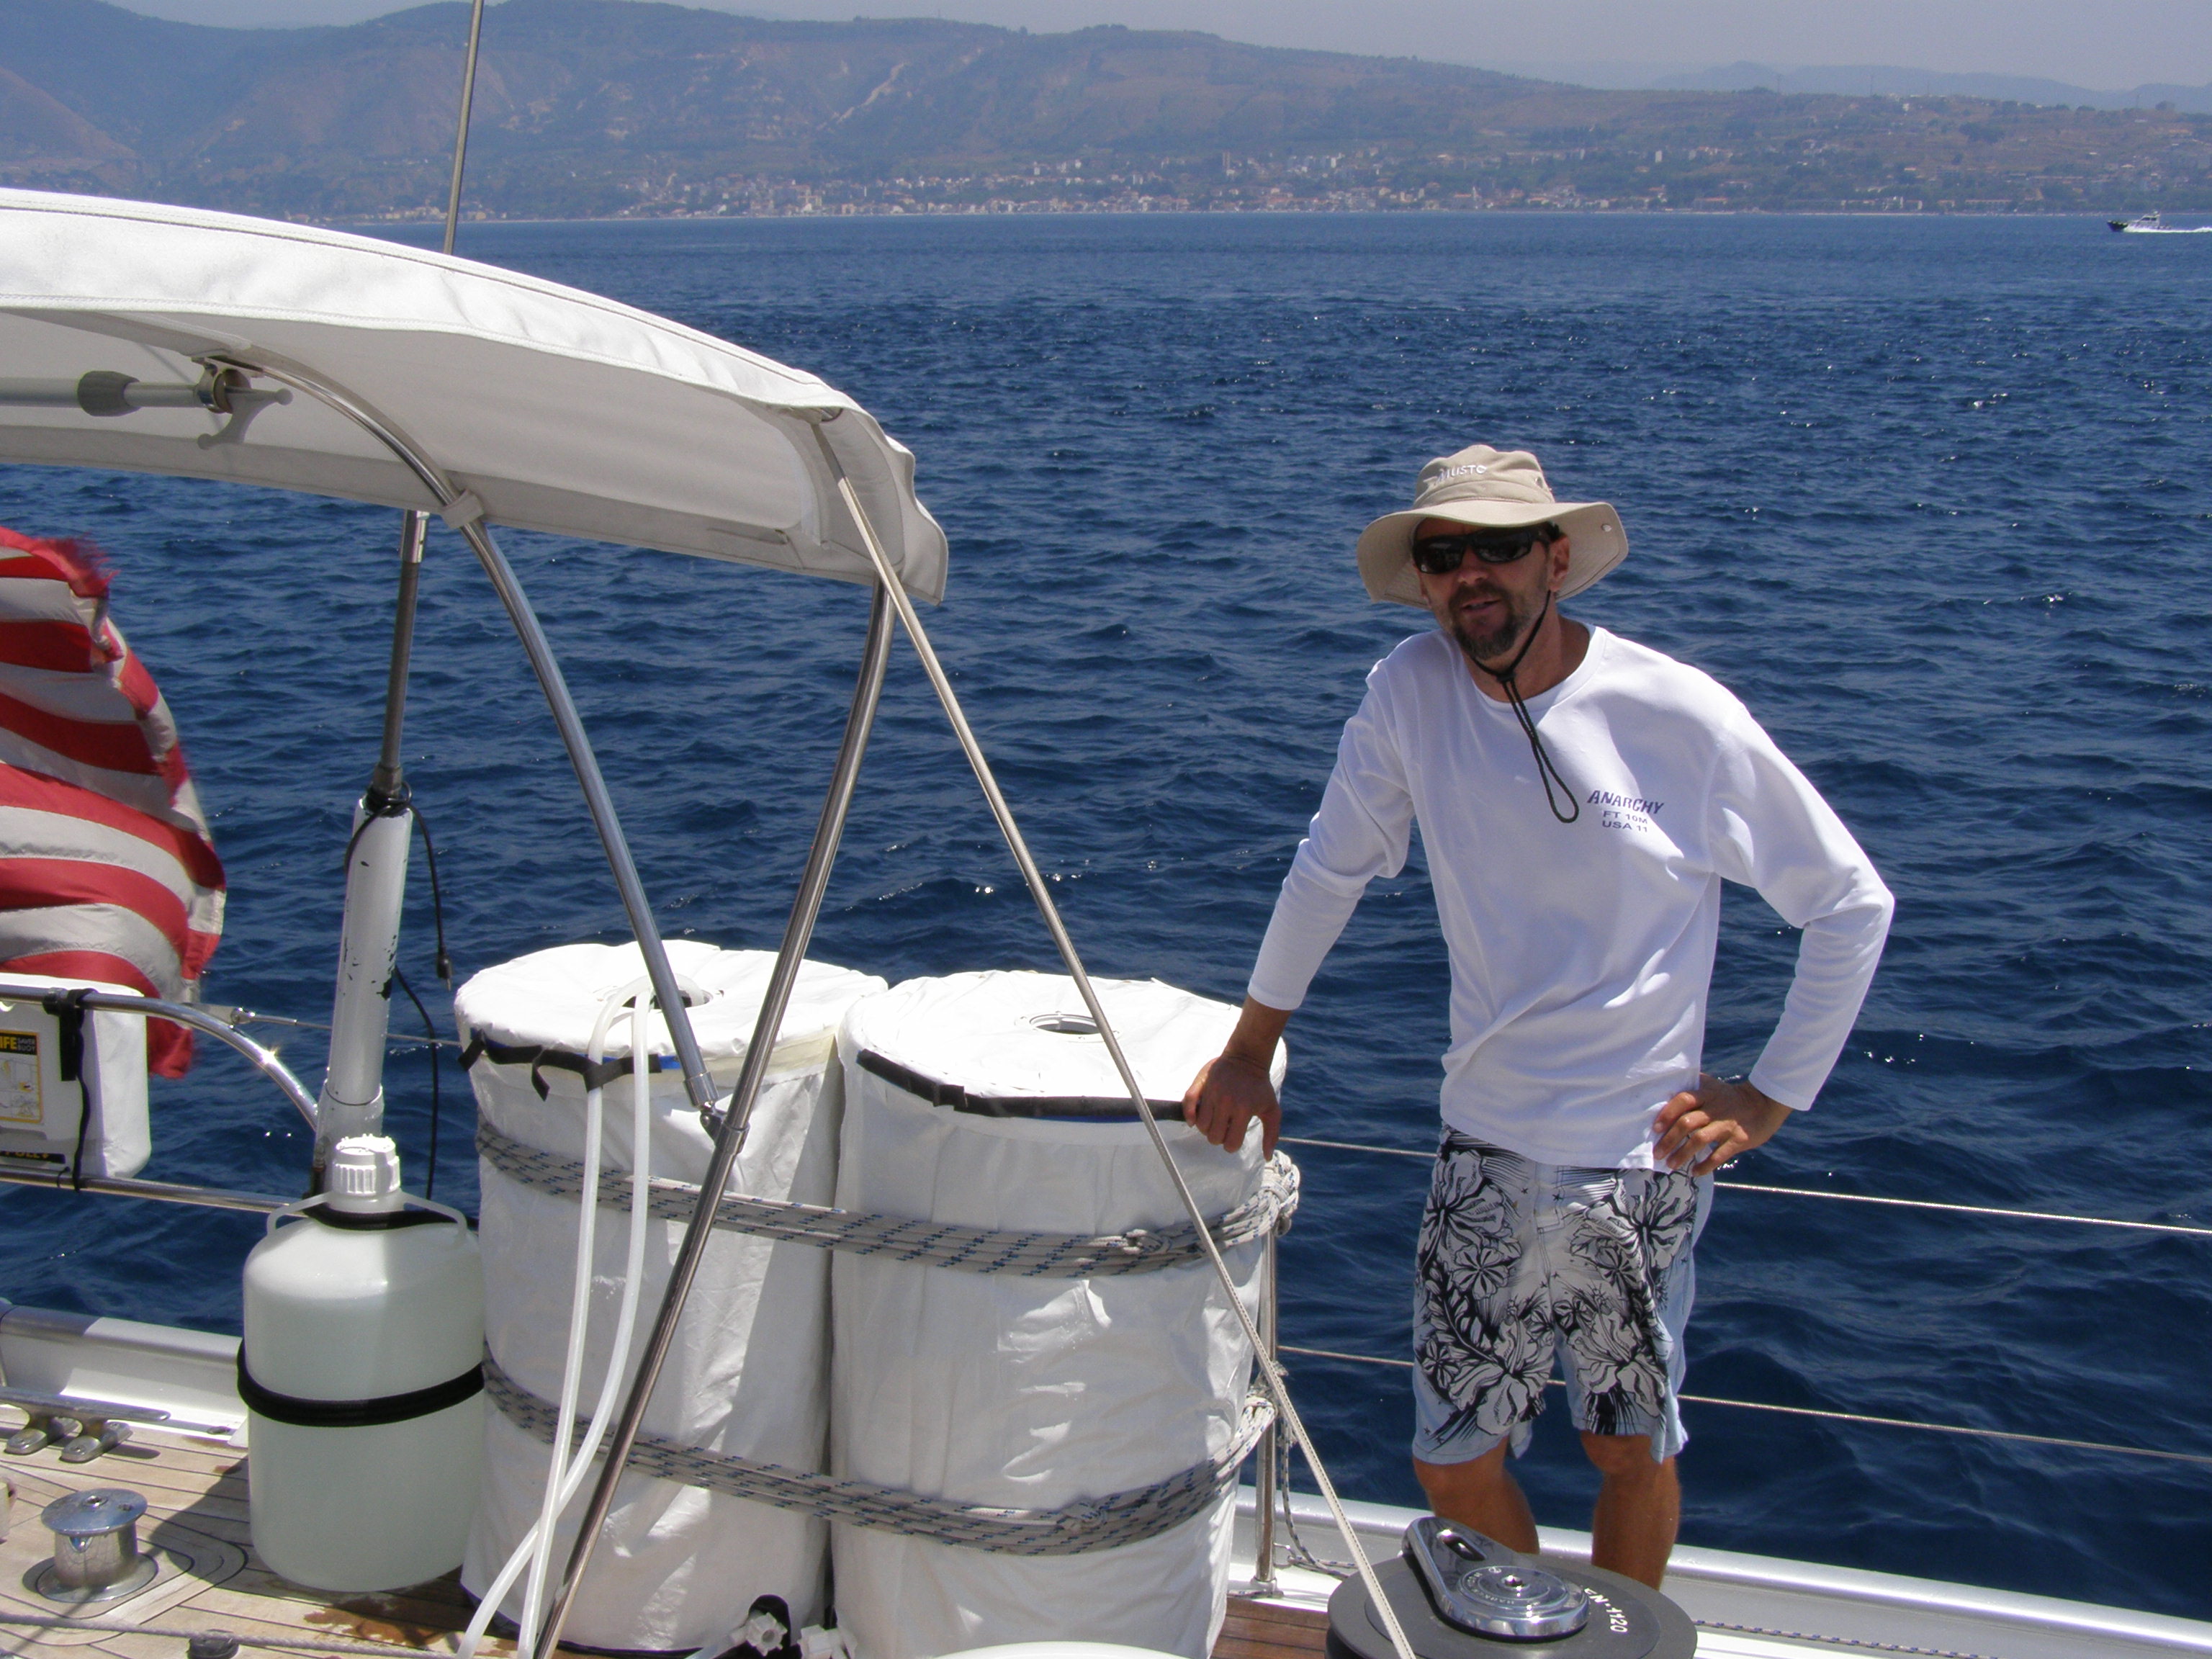 John helping collect the sample in the middle of the Straits of Messina